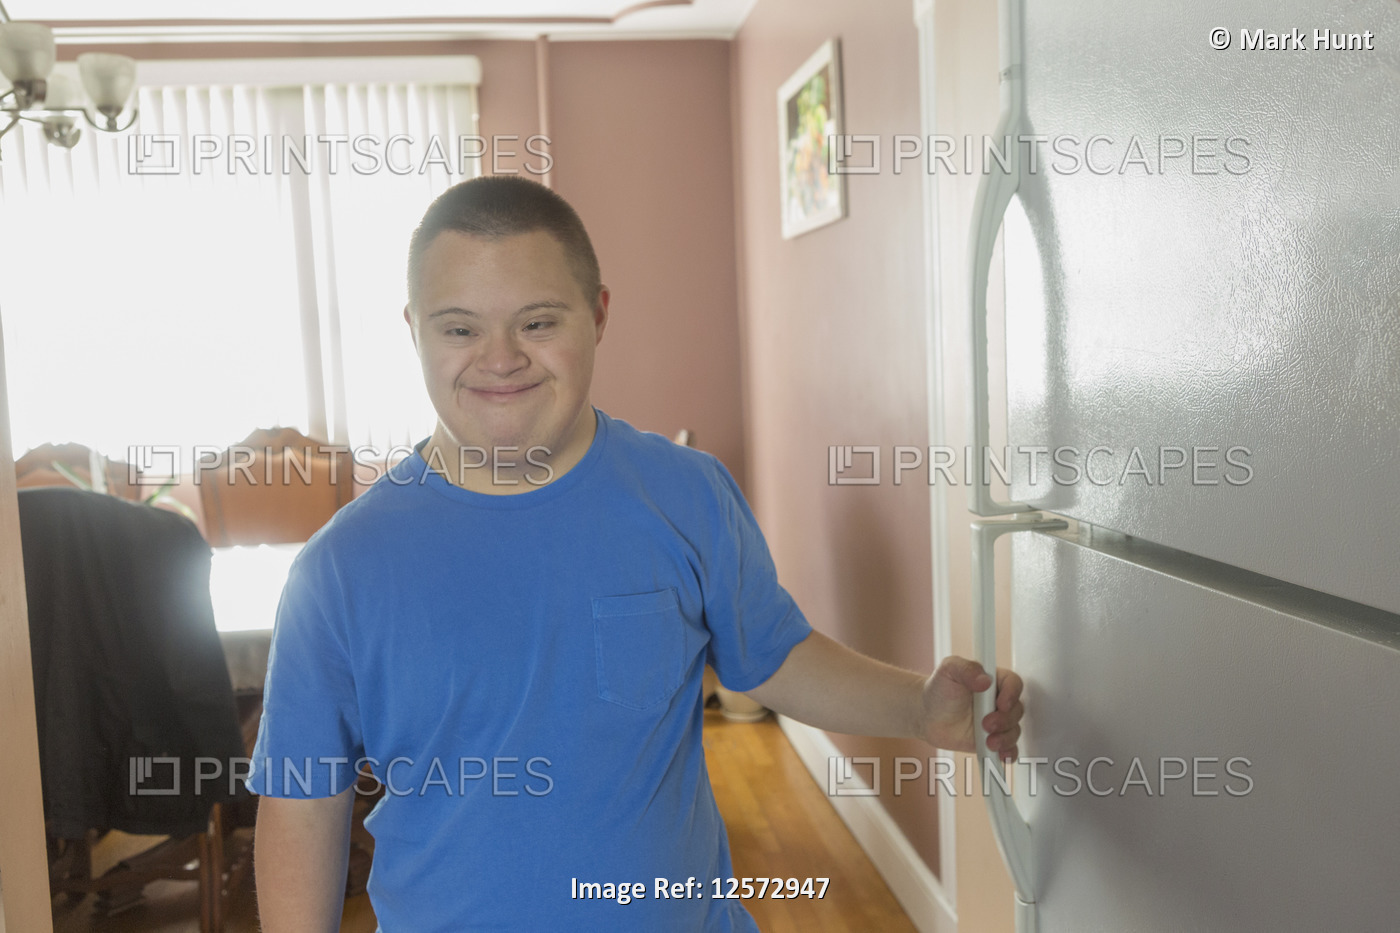 Teen boy with Down Syndrome opening refrigerator